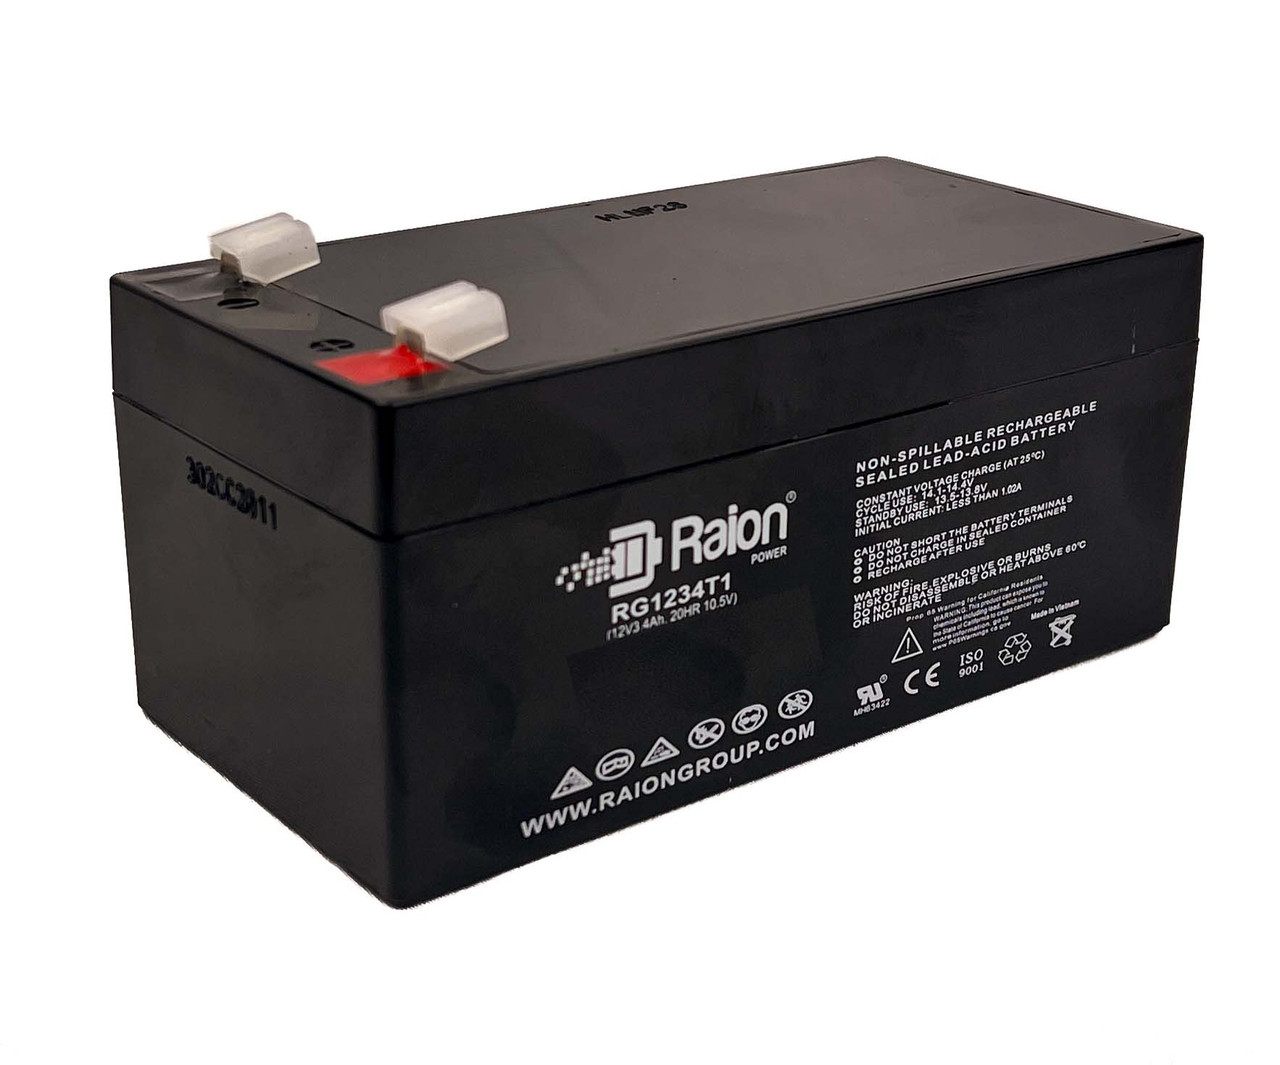 Raion Power 12V 3.4Ah Non-Spillable Replacement Battery for Tempest TR3.5-12A